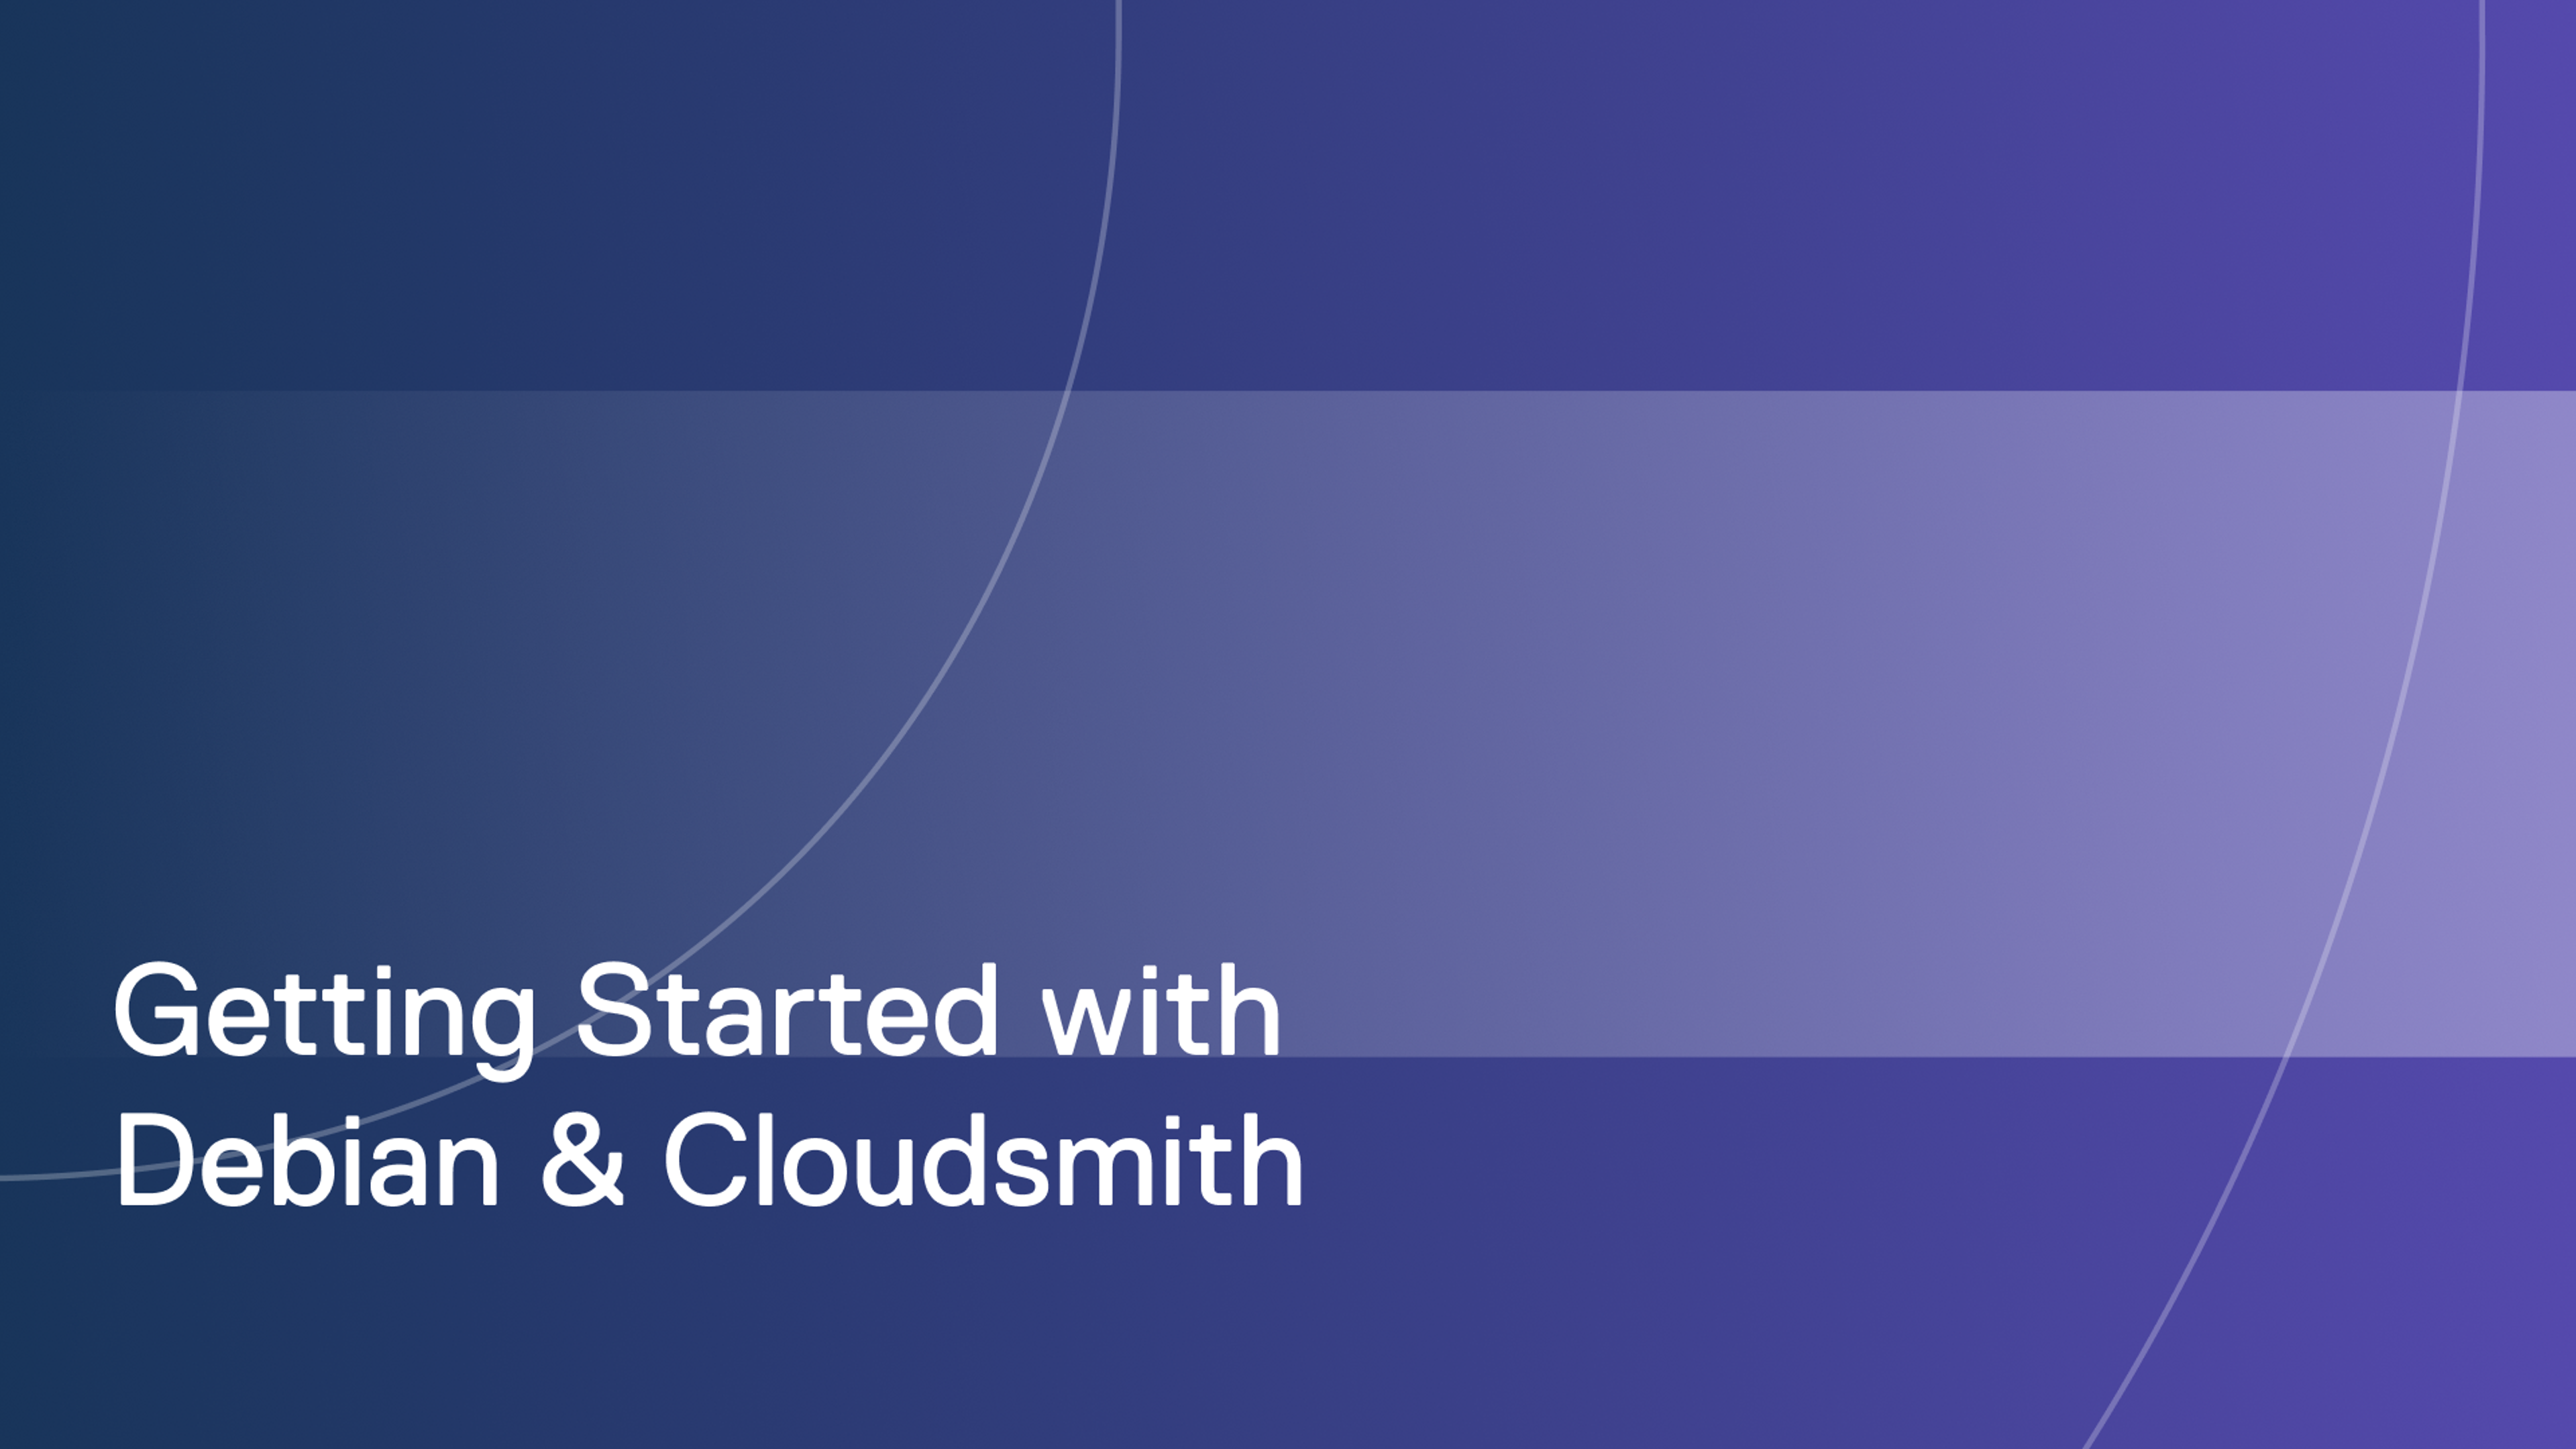 Getting started with Debian and Cloudsmith